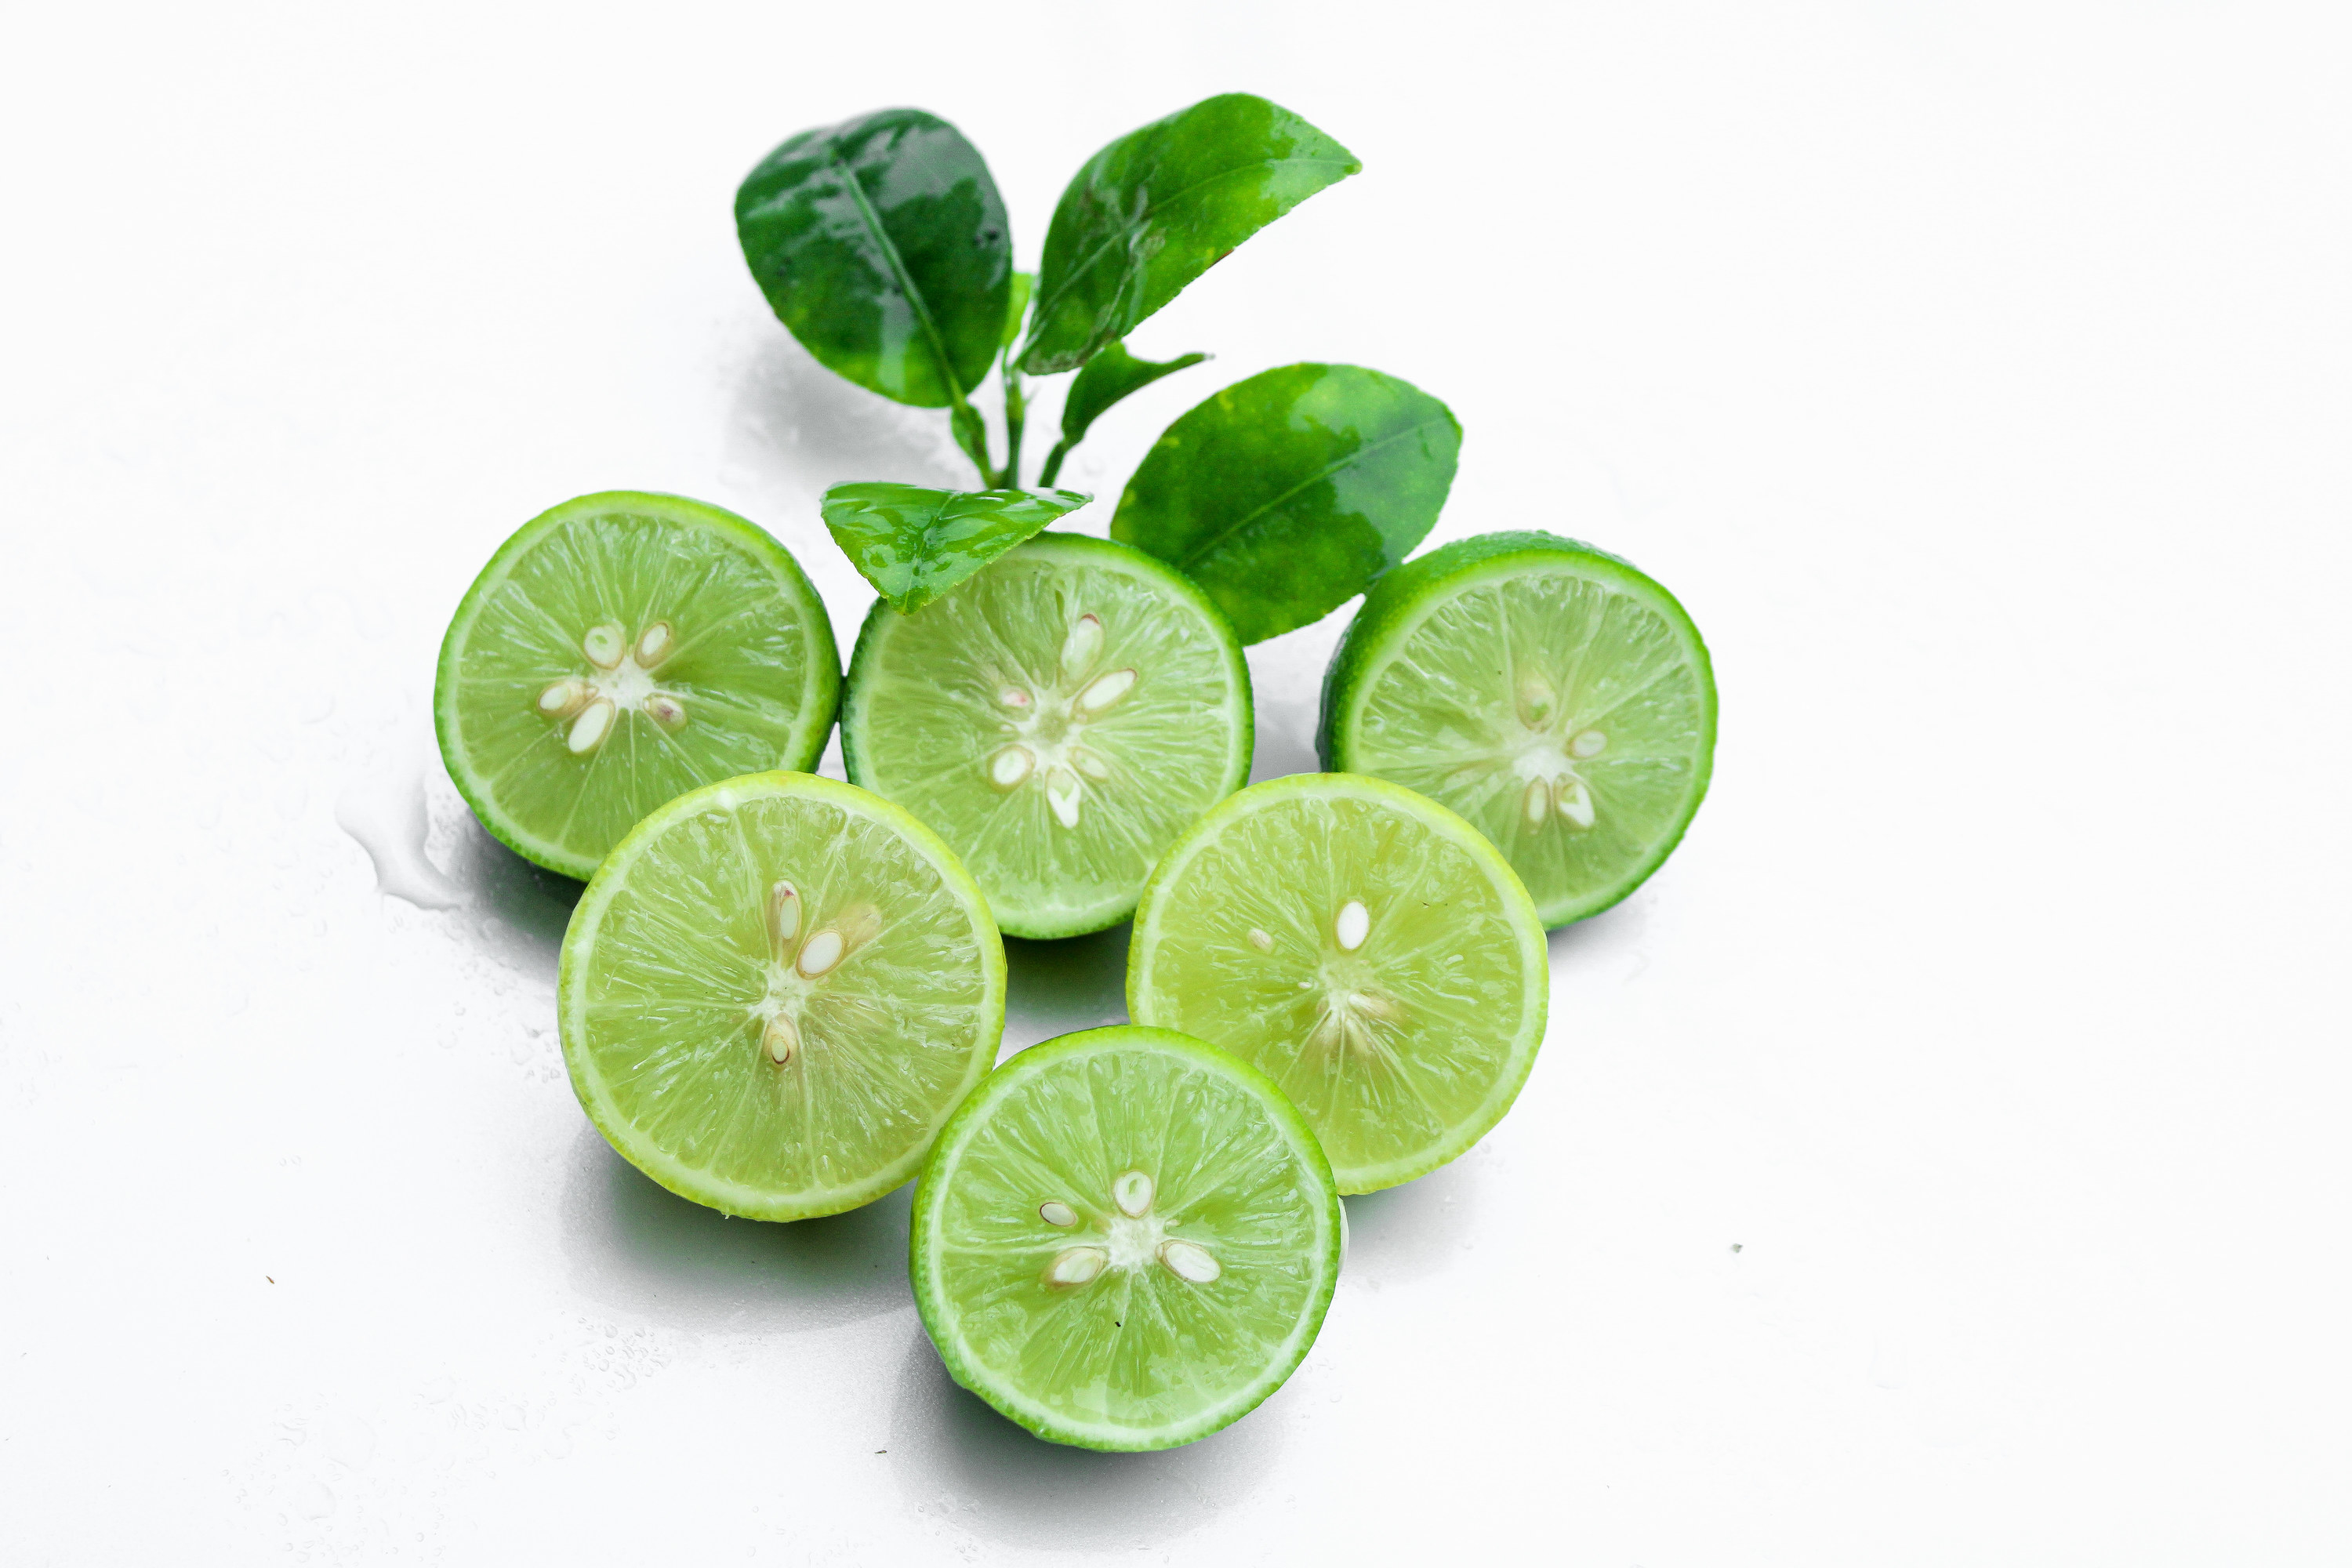 Six lime halves arranged in a triangle, cut-sides out